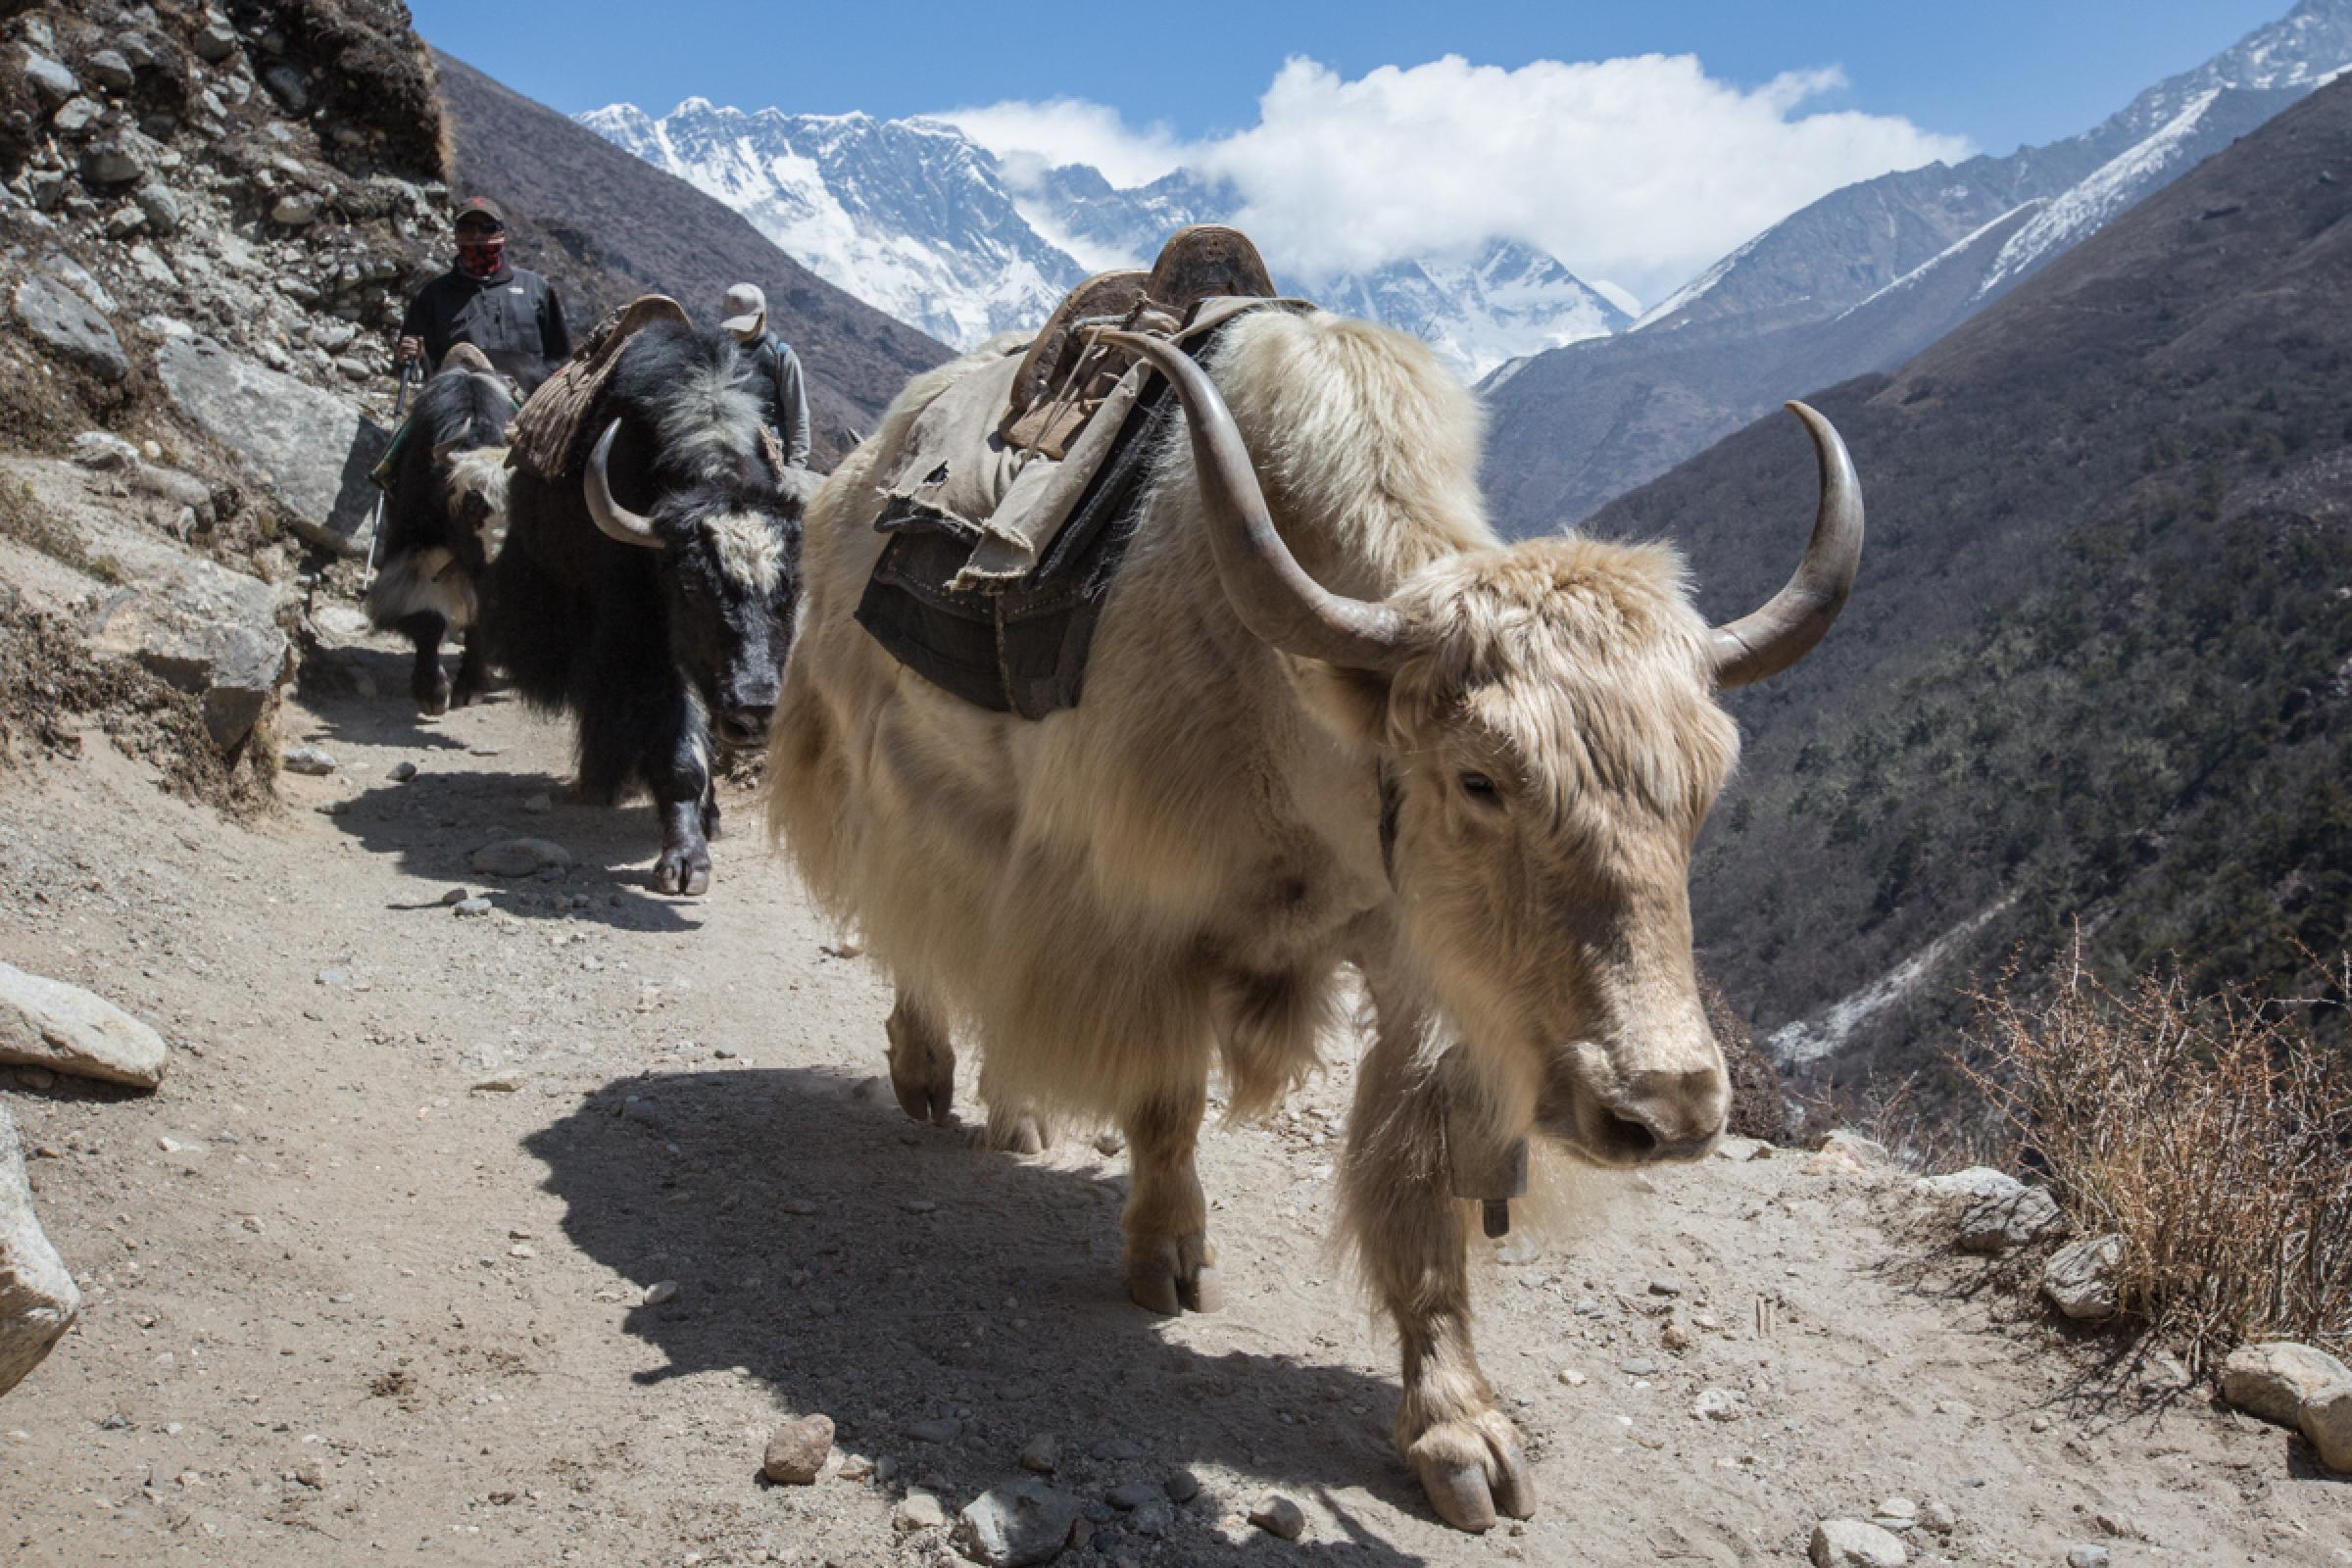 Trek to Dingboche (14,100 ft/4,300 m) approx. 5 hours